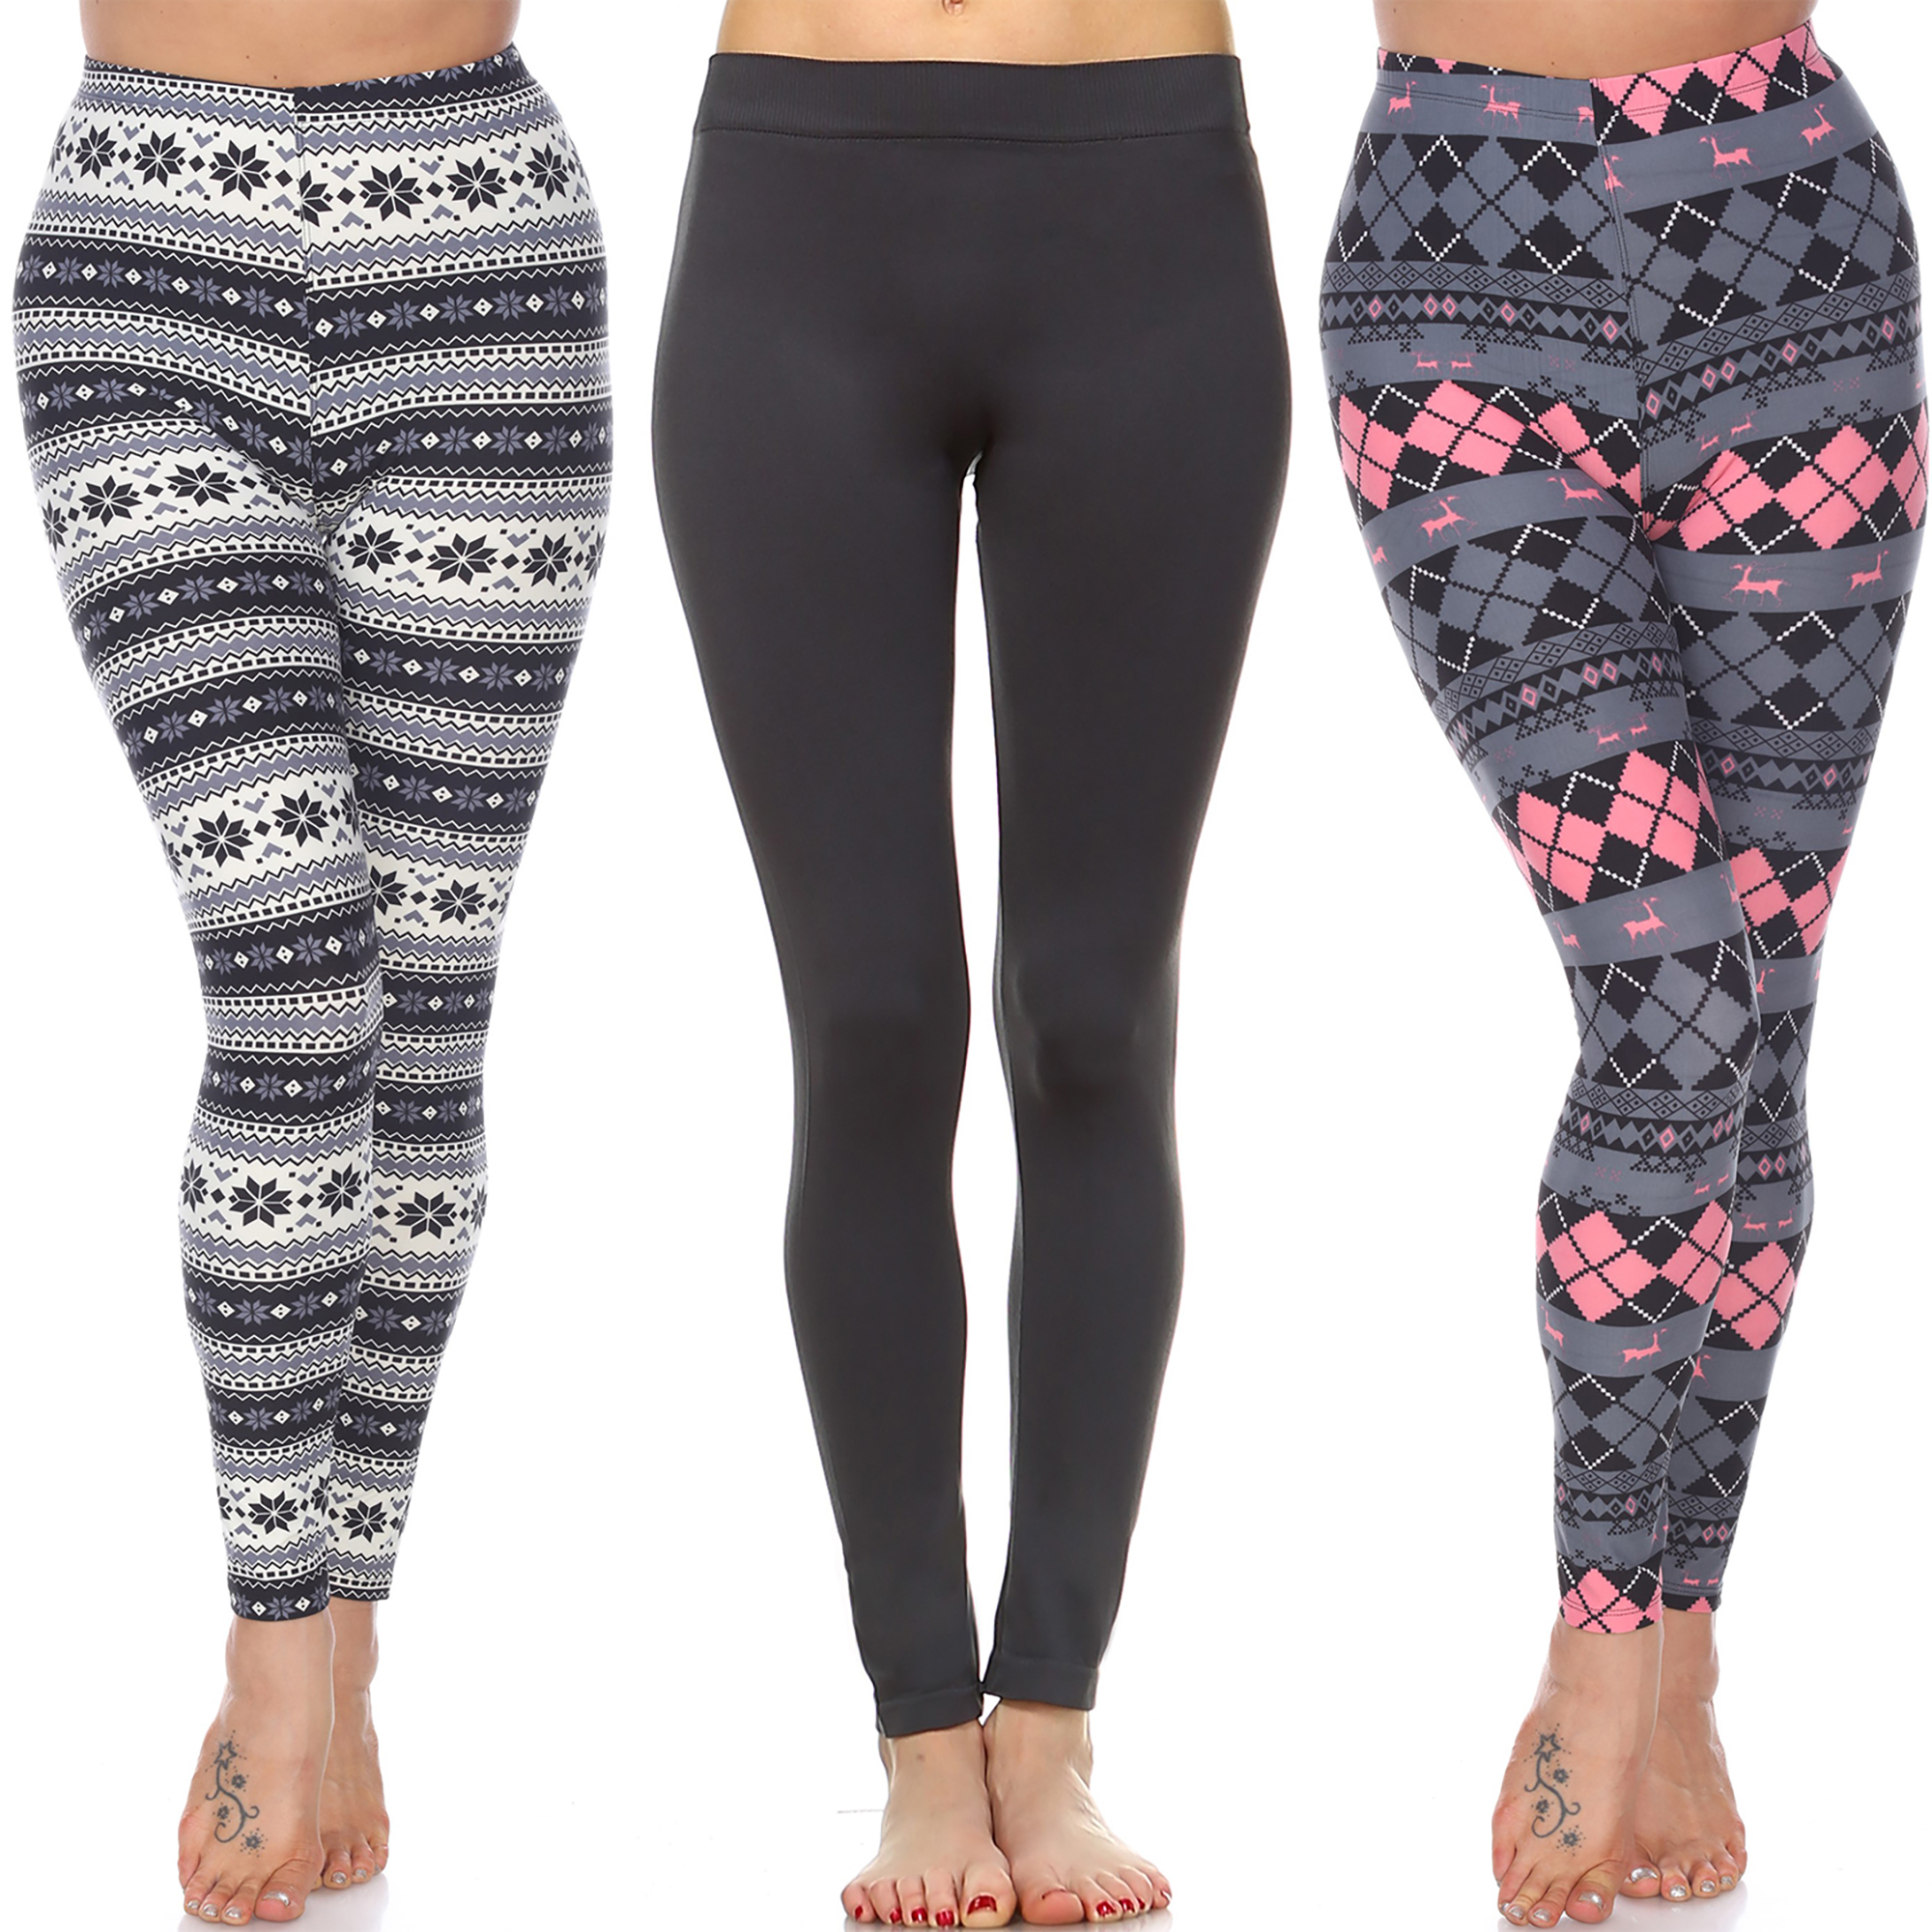 White Mark Women's Pack Of 3 Holiday Leggings - Charcoal, Grey/Pink Argyle, Black/Grey, One Size Plus